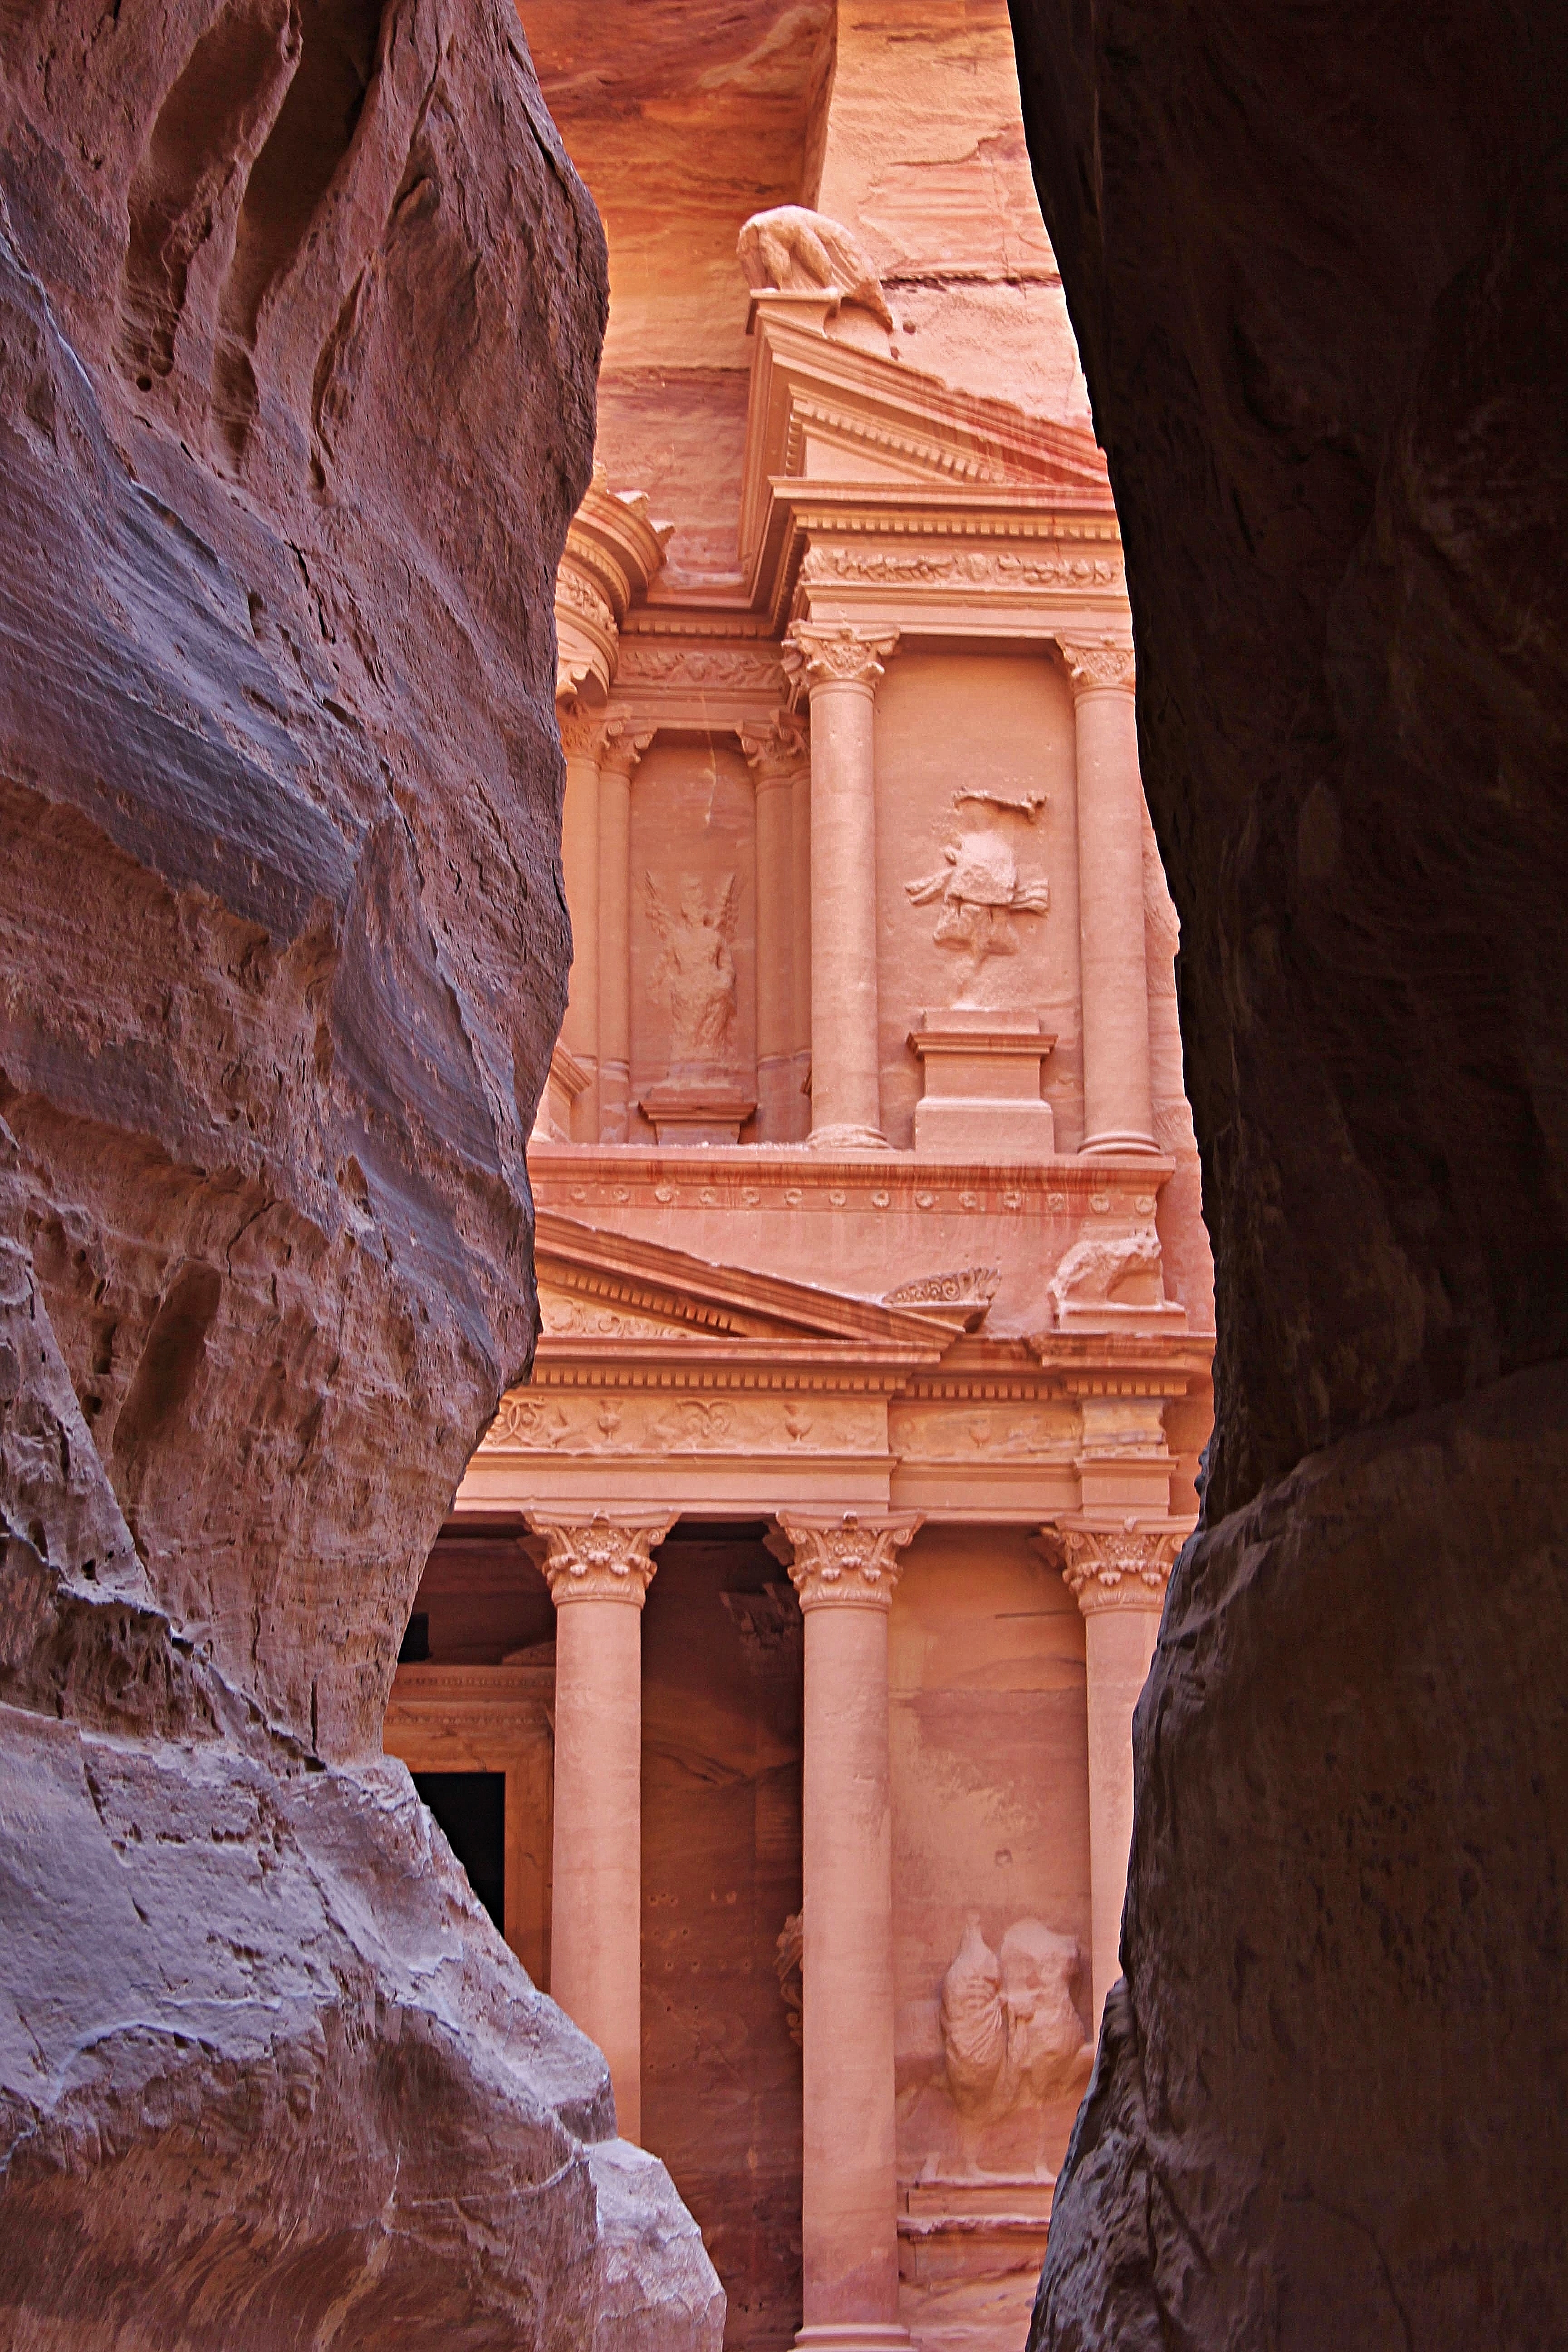 From the Siq to the Treasury in Petra